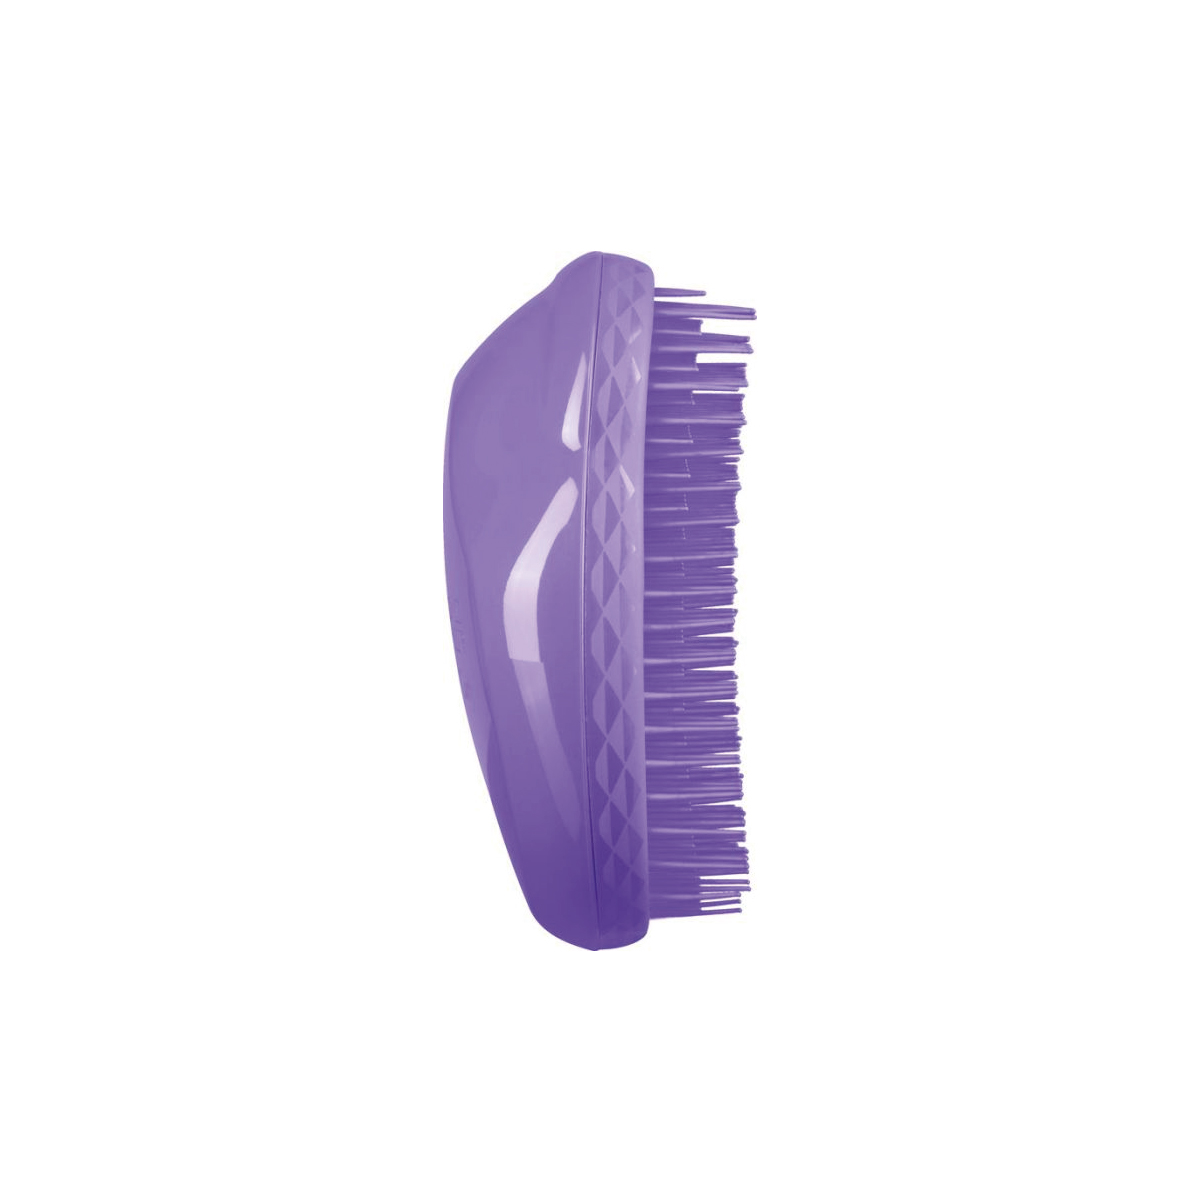 Tangle Teezer Thick & Curly